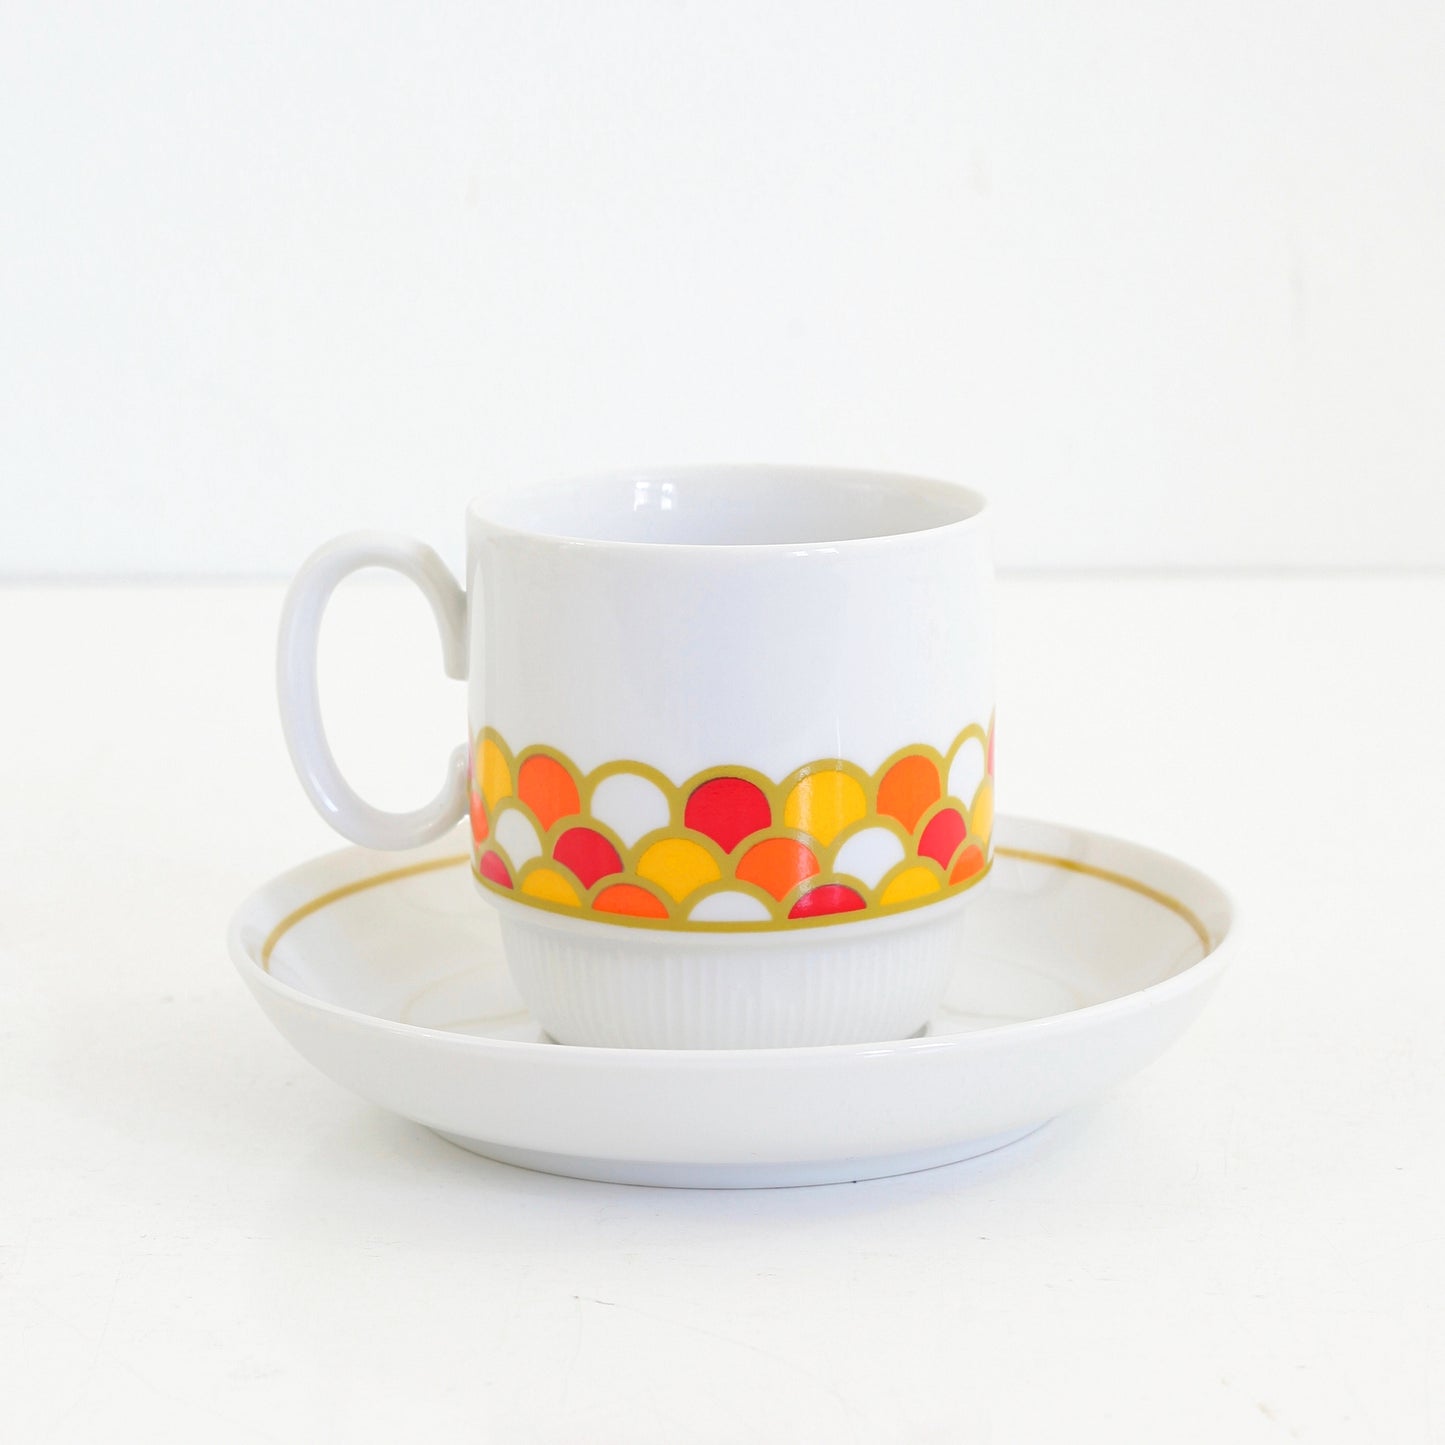 SOLD - Mid Century Georges Briard 'Carousel' Cup & Saucer Set